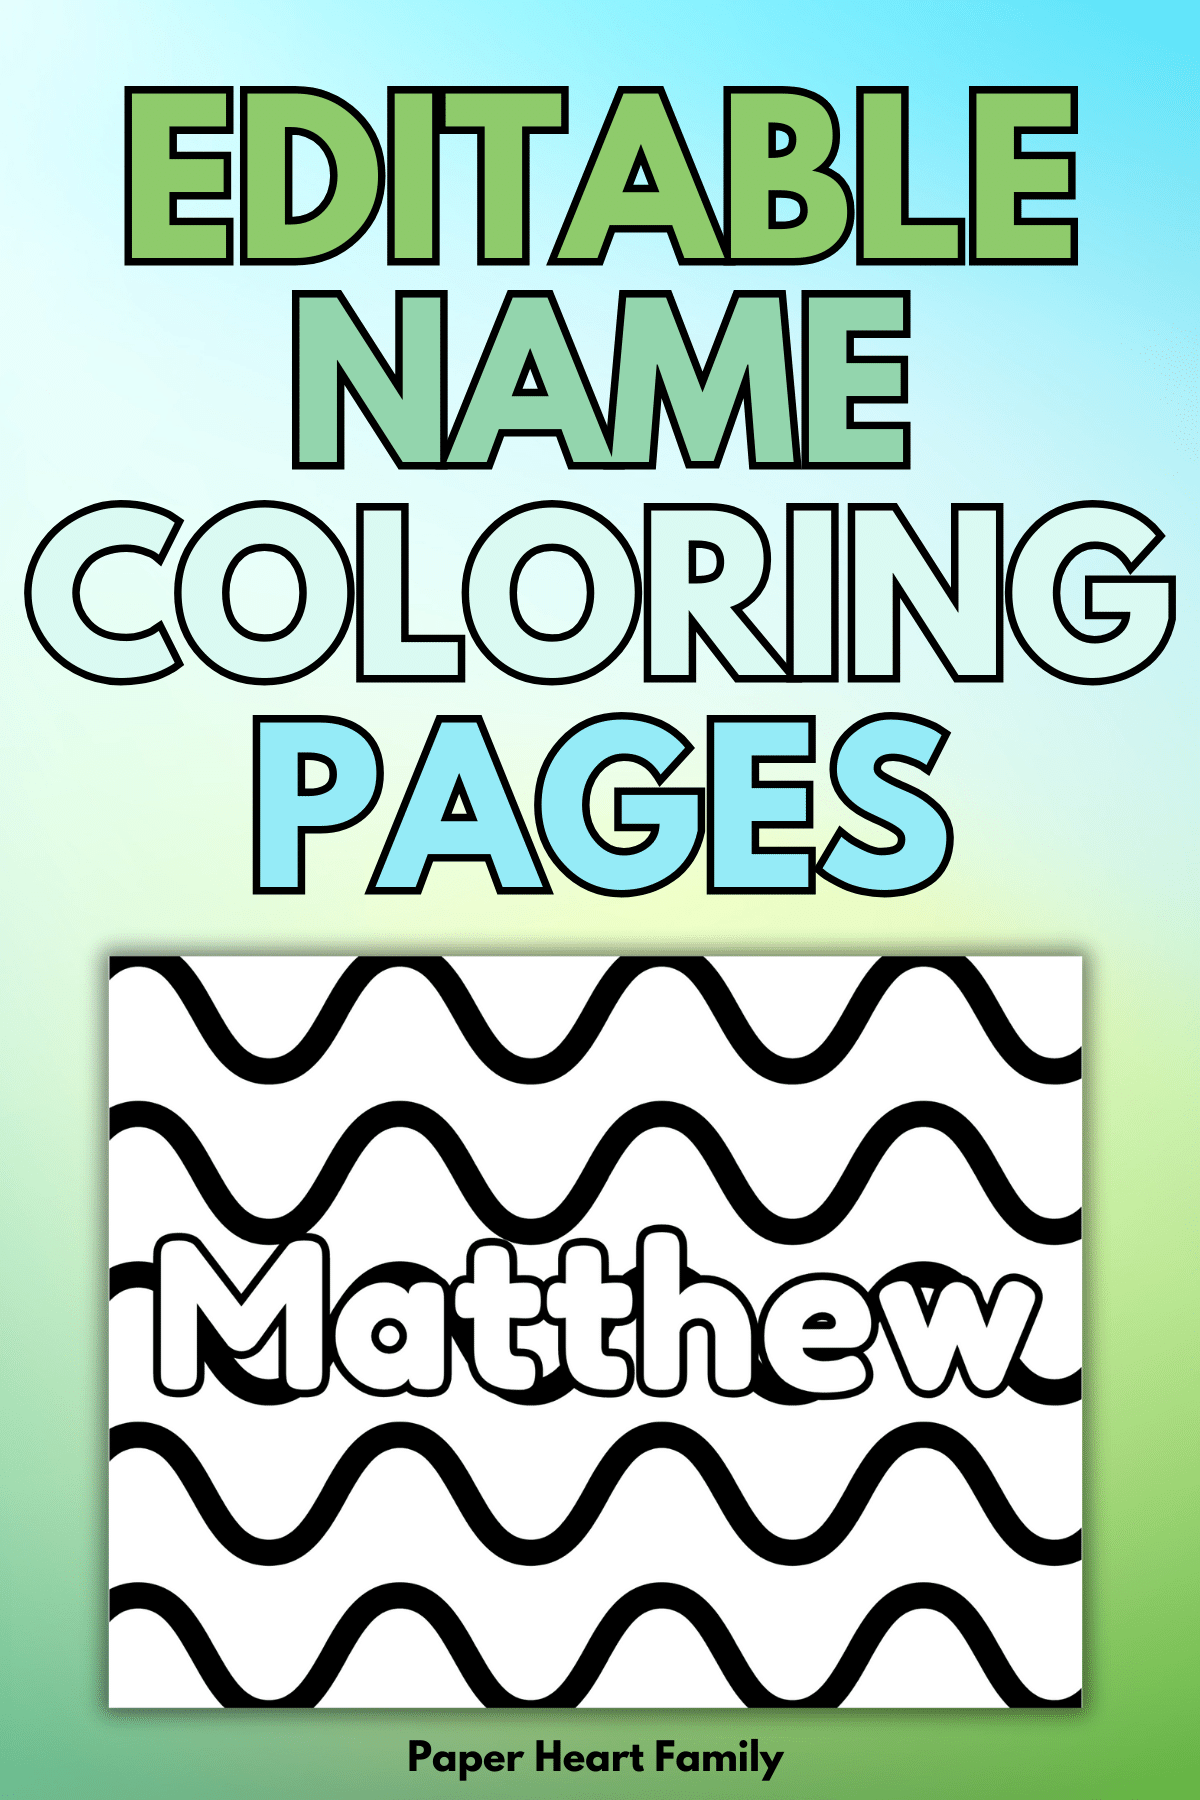 Squiggly lines coloring page with name Matthew